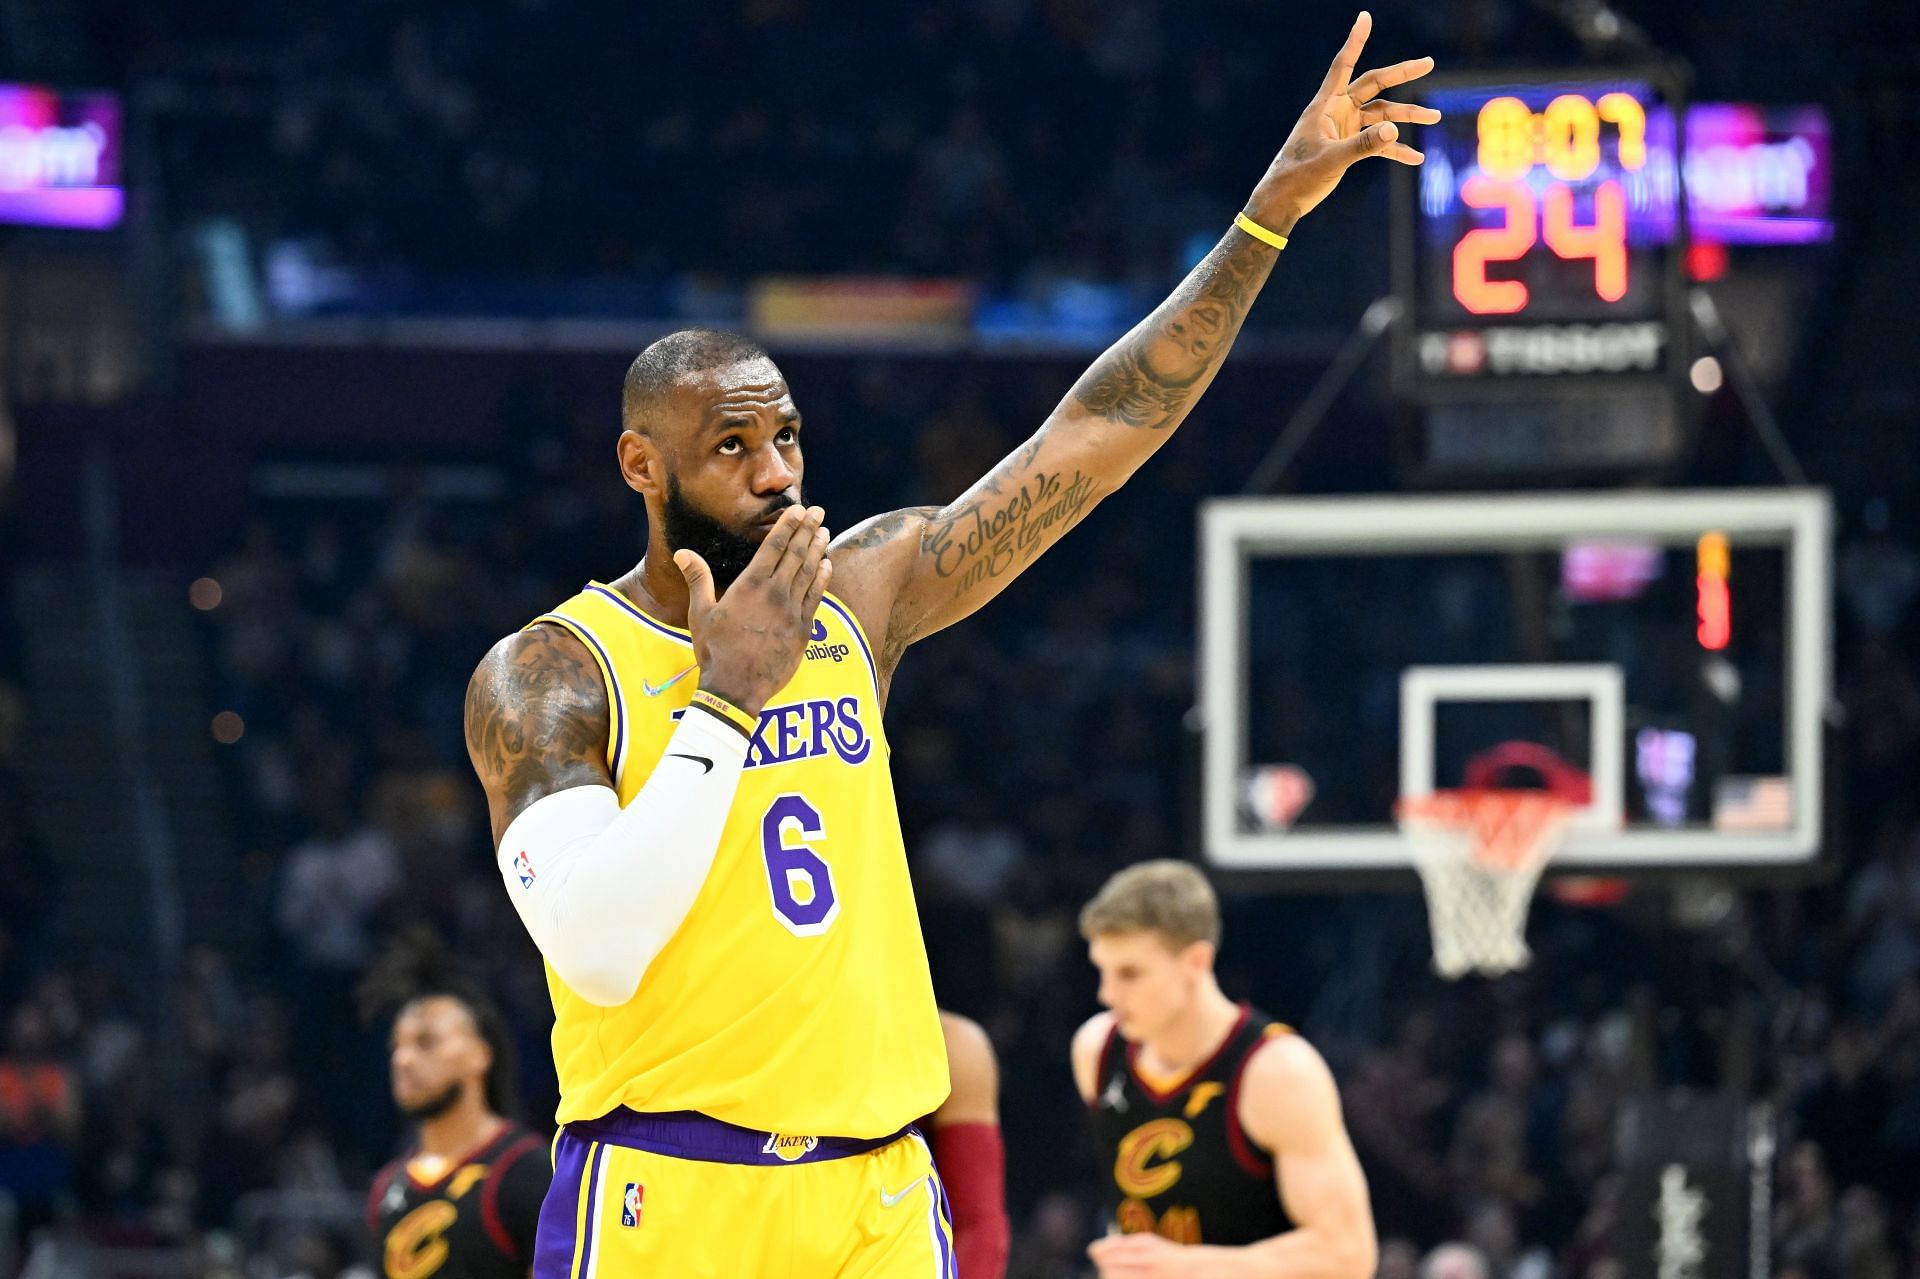 LeBron James of the LA Lakers waves to the crowd against the Cleveland Cavaliers on March 21, 2022 in Cleveland, Ohio.